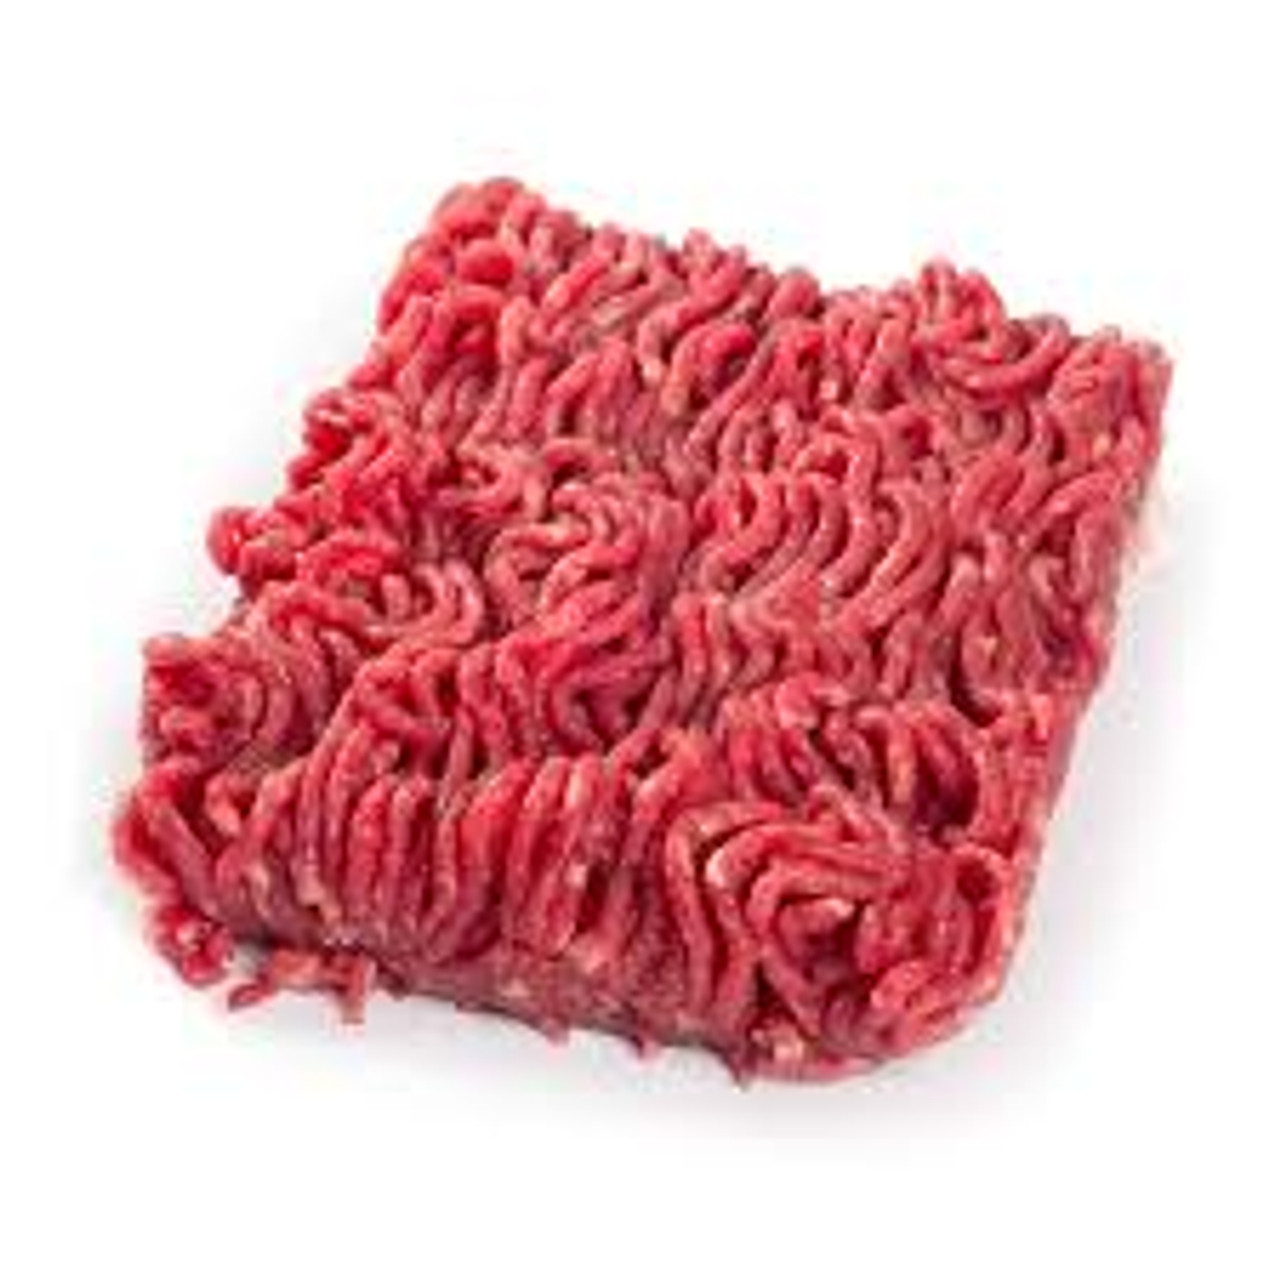 Ground Beef 80% Lean/ 20% Fat at Whole Foods Market